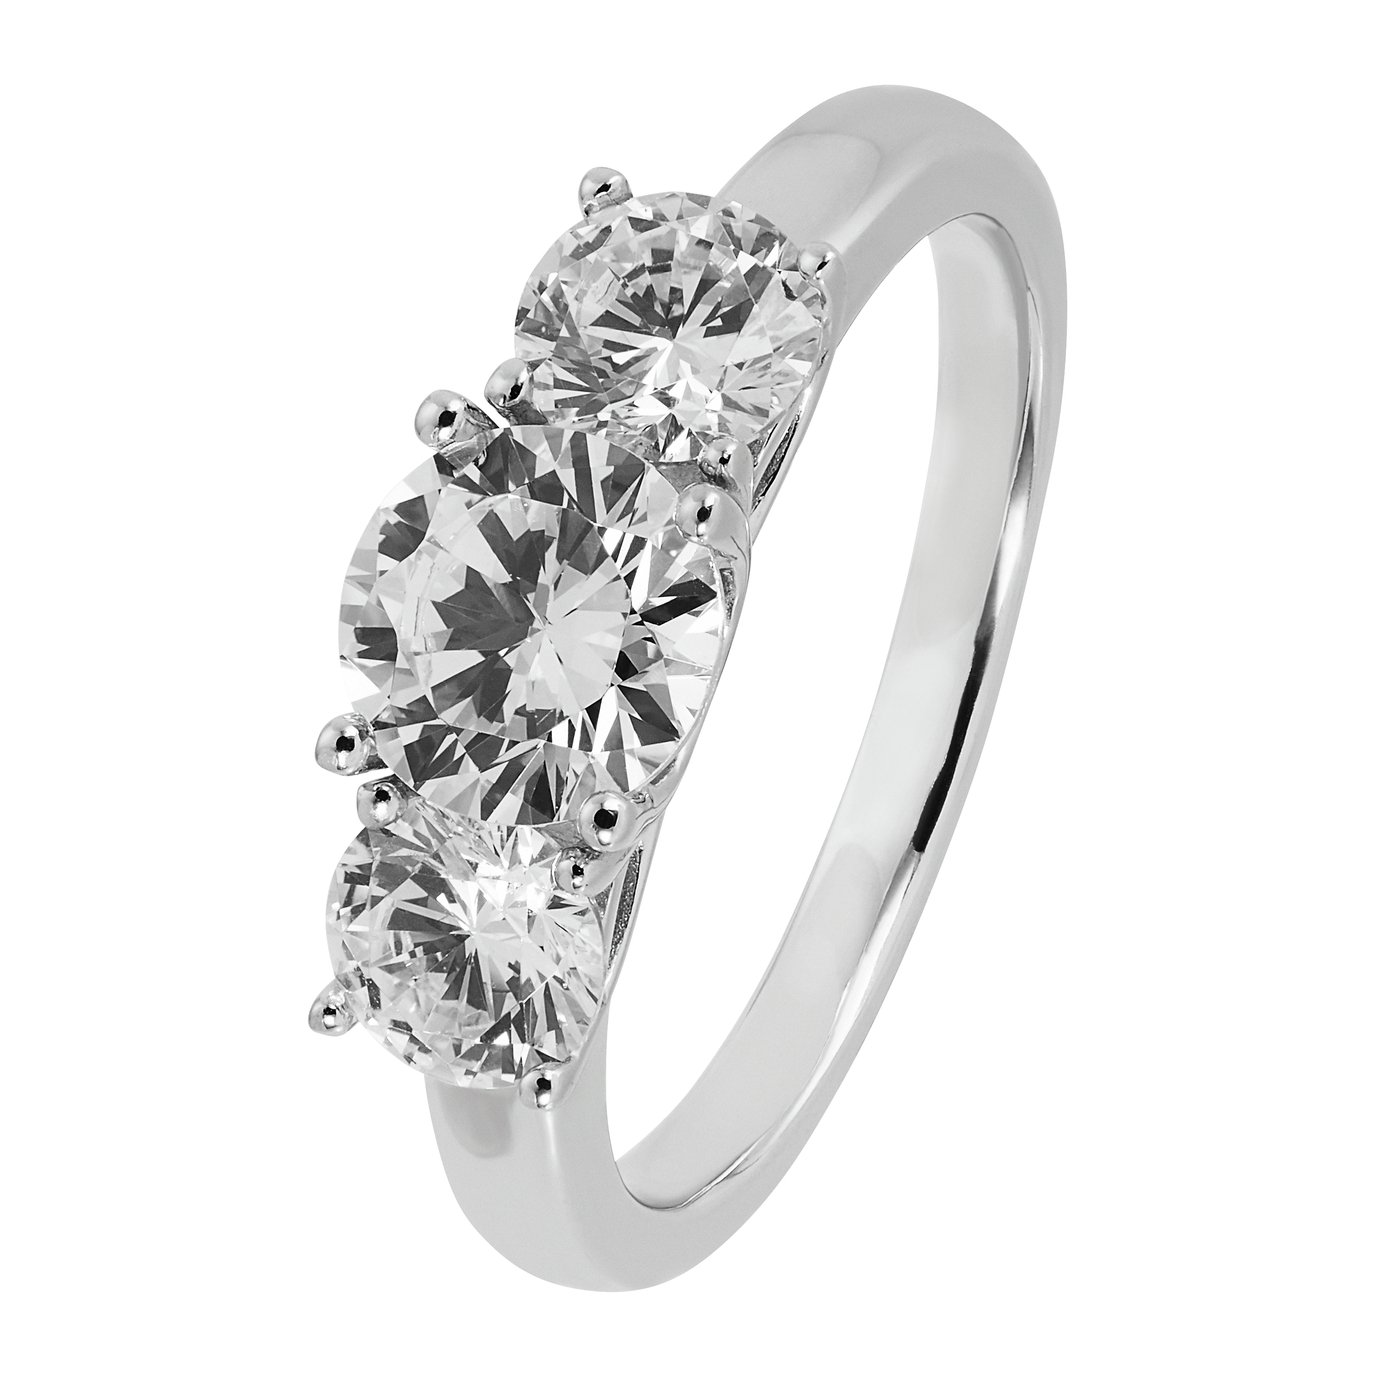 Revere Sterling Silver Round Cubic Zirconia Wedding Ring - M